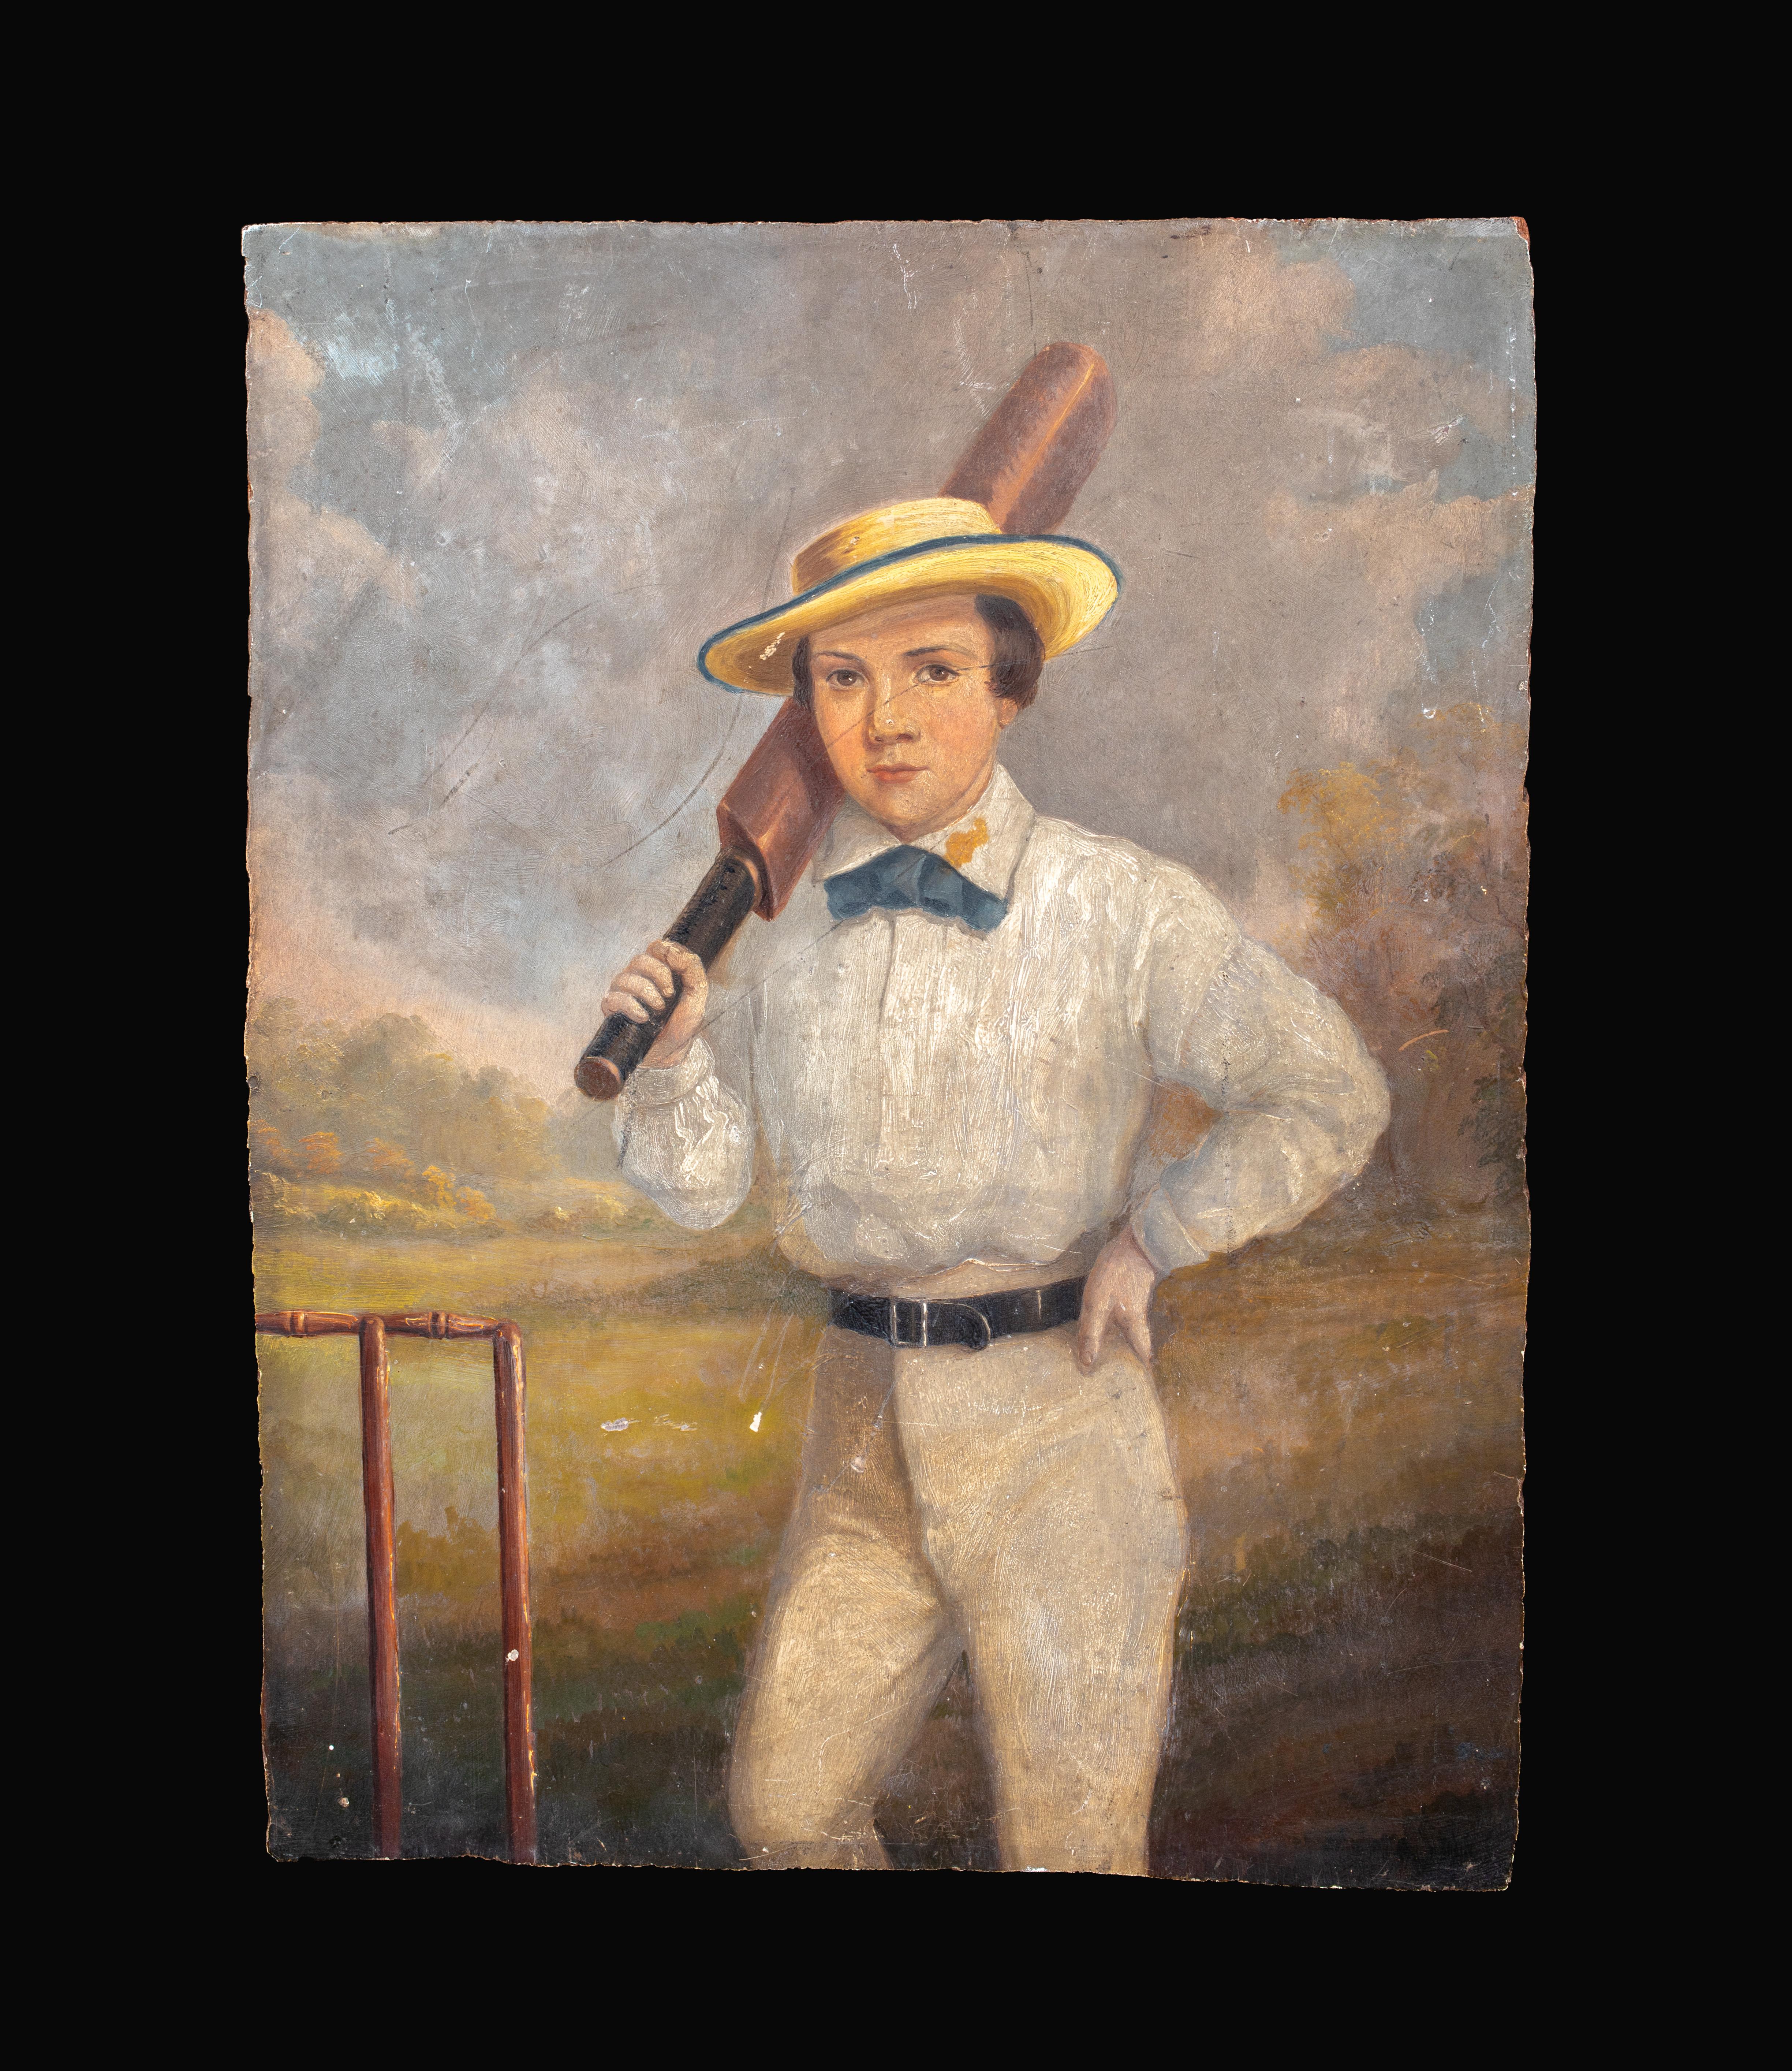 The Young Cricketer, 19th Century  English School - Painting by Unknown